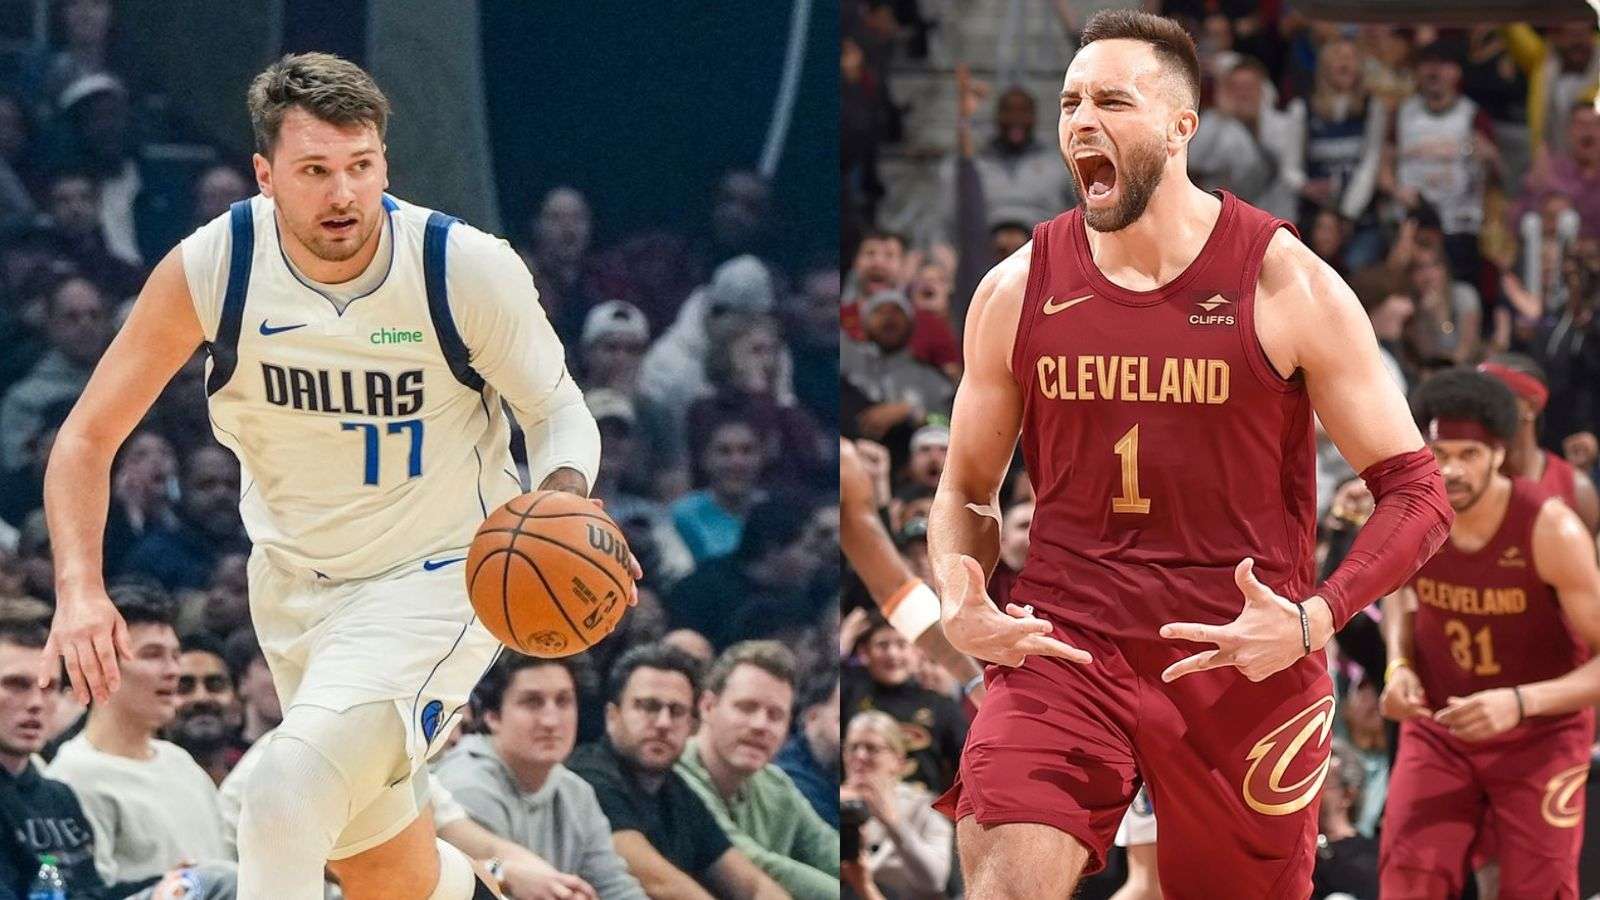 Dallas Mavericks' Luka Doncic (left) and Cleveland Cavaliers' Max Strus (right) in their February 27 matchup.